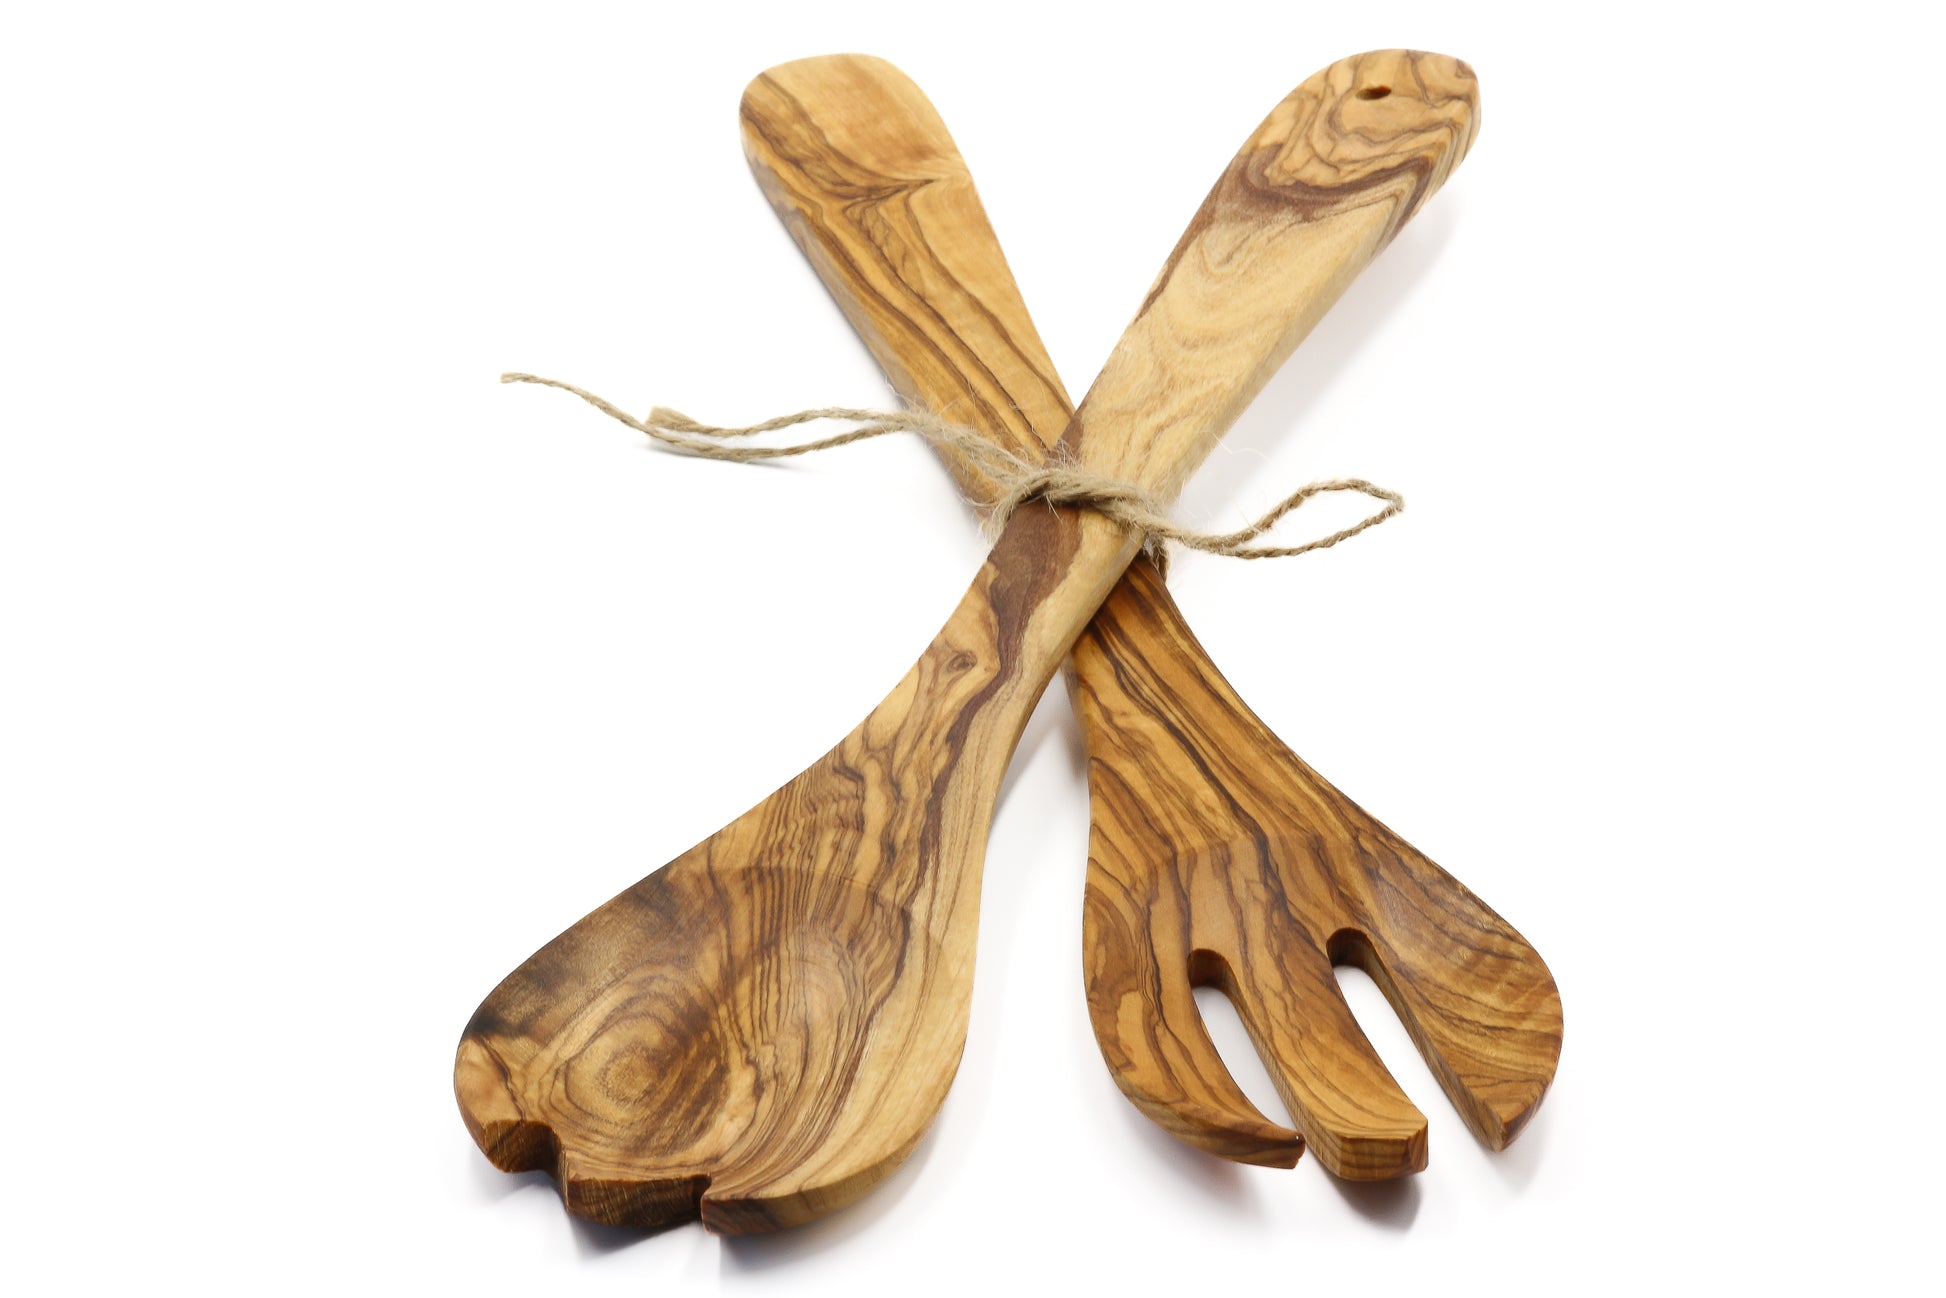 Serve salads with a touch of elegance using olive wood duo salad servers